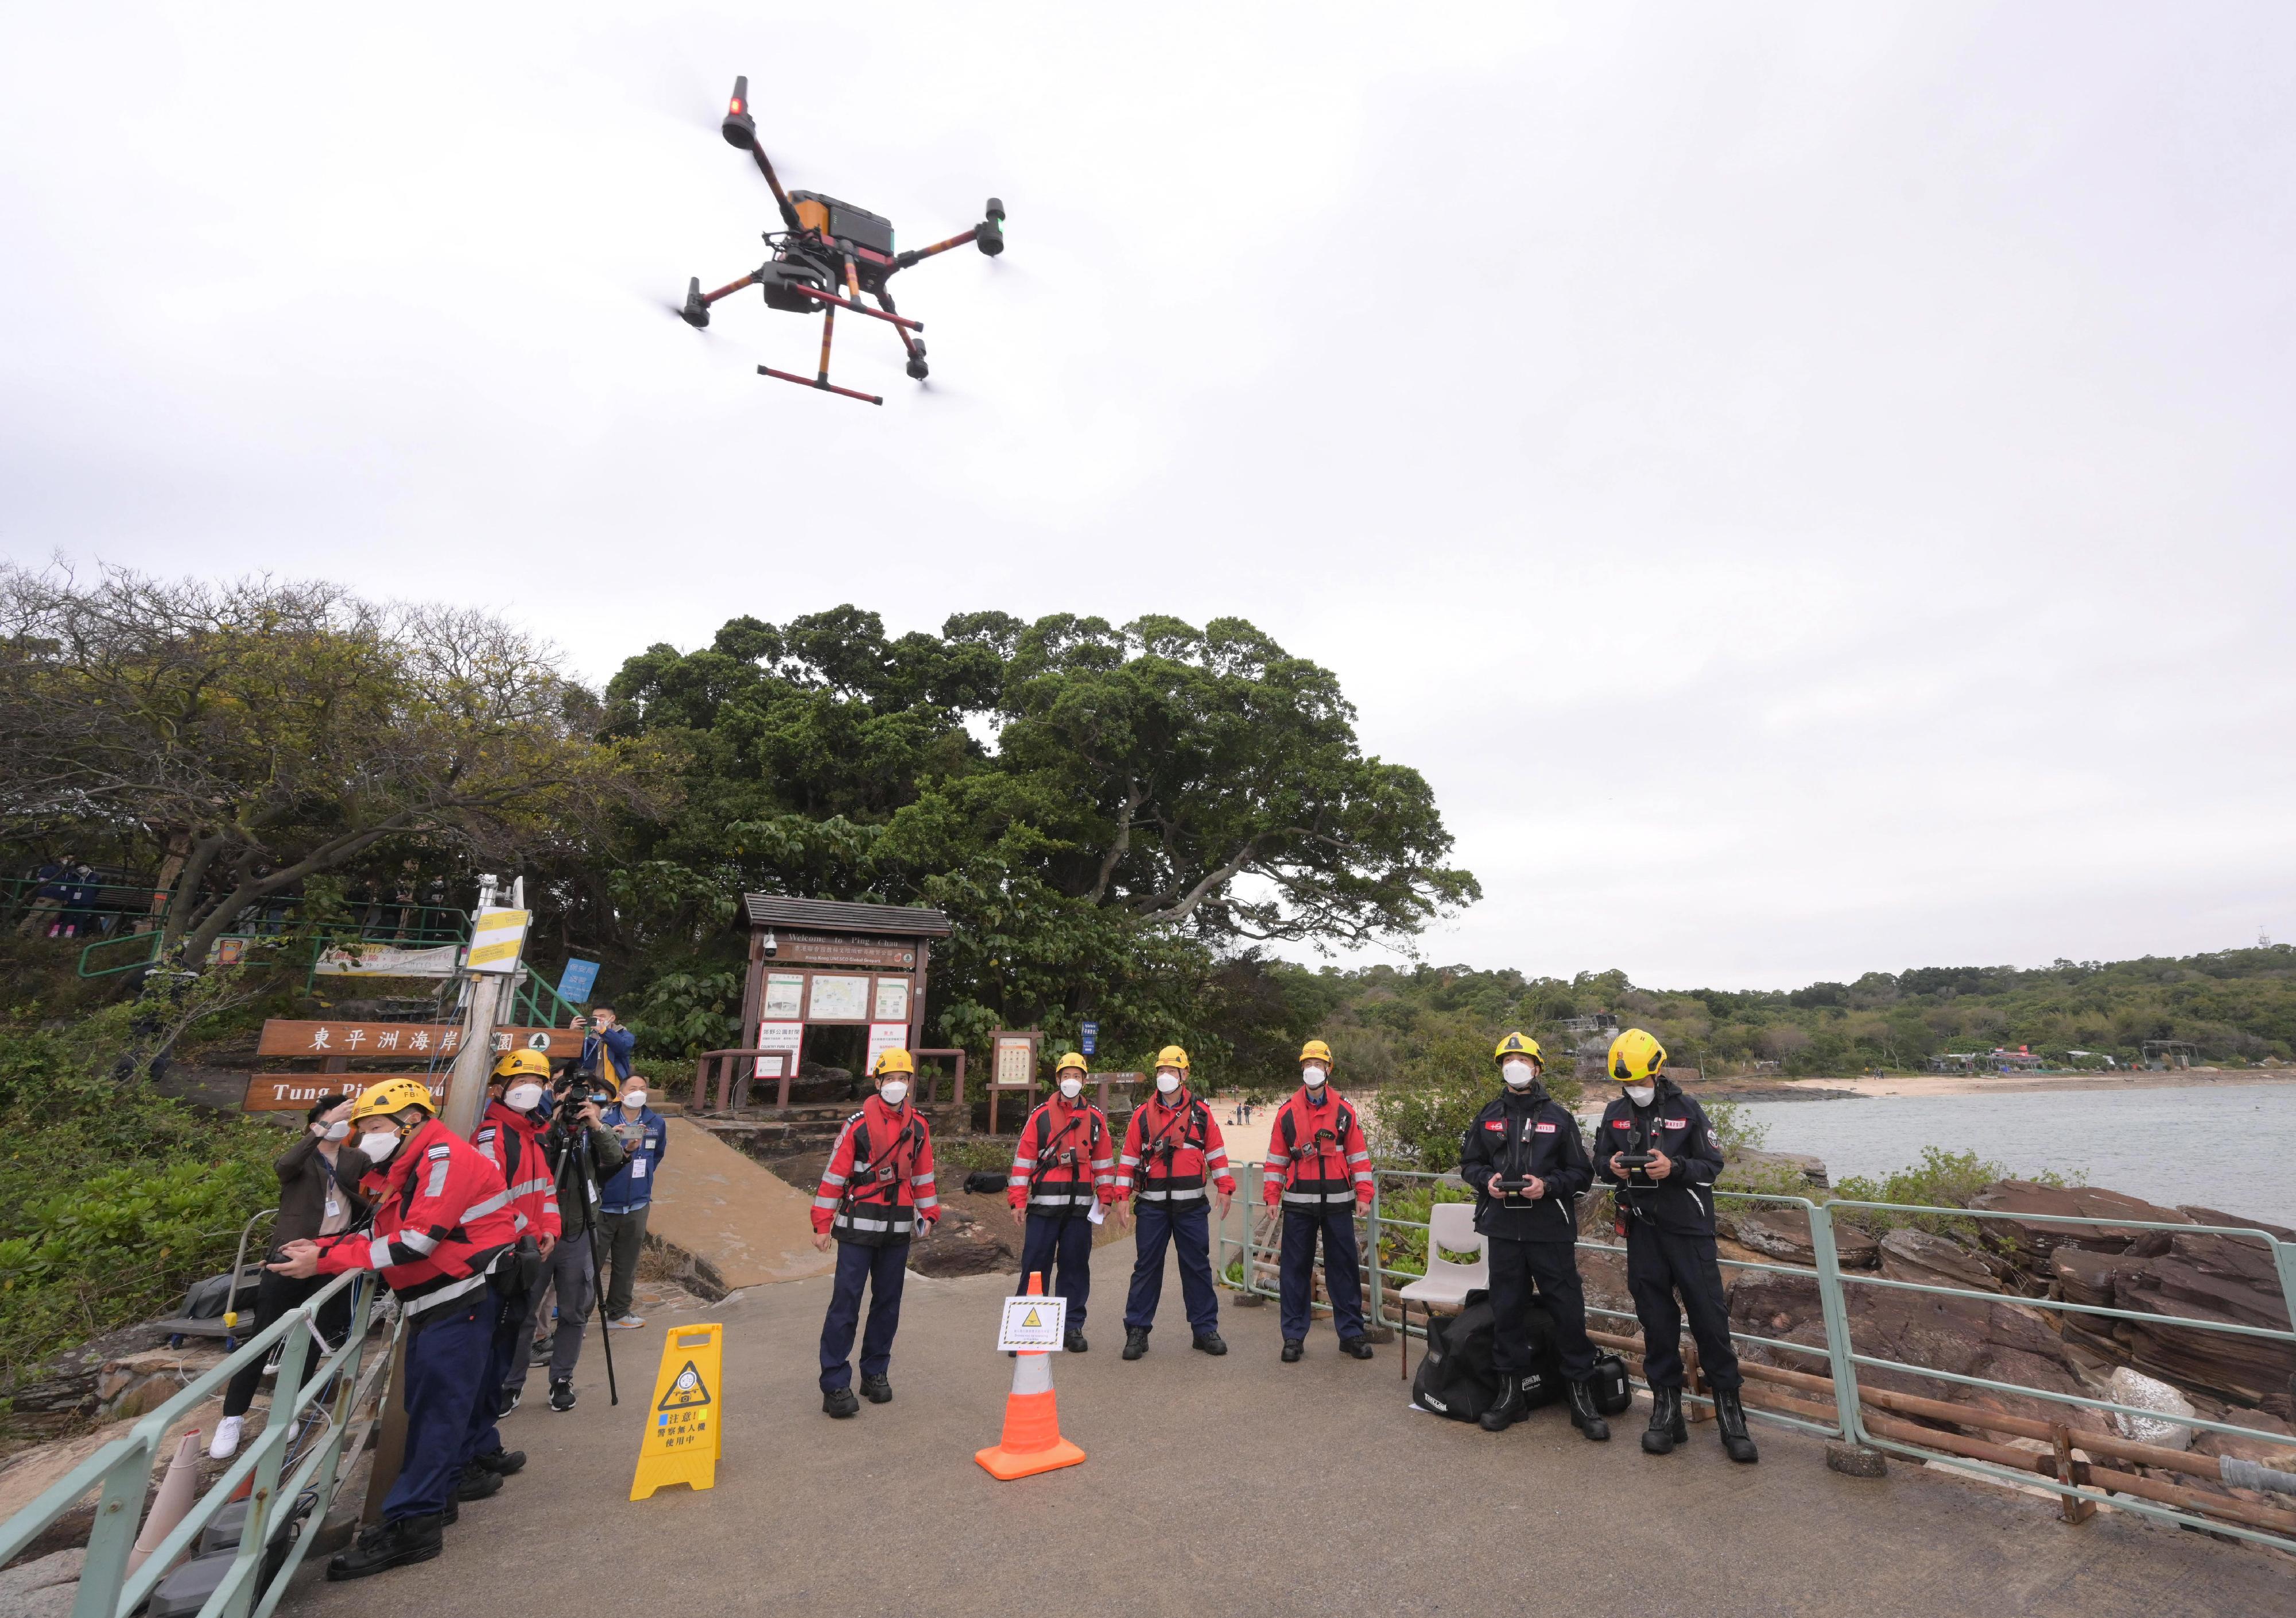 The Government conducted an inter-departmental exercise, "Checkerboard III", today (January 12). Photo shows Fire Services Department personnel conducting a search-and-rescue operation with the Unmanned Aircraft Monitoring System on Tung Ping Chau.